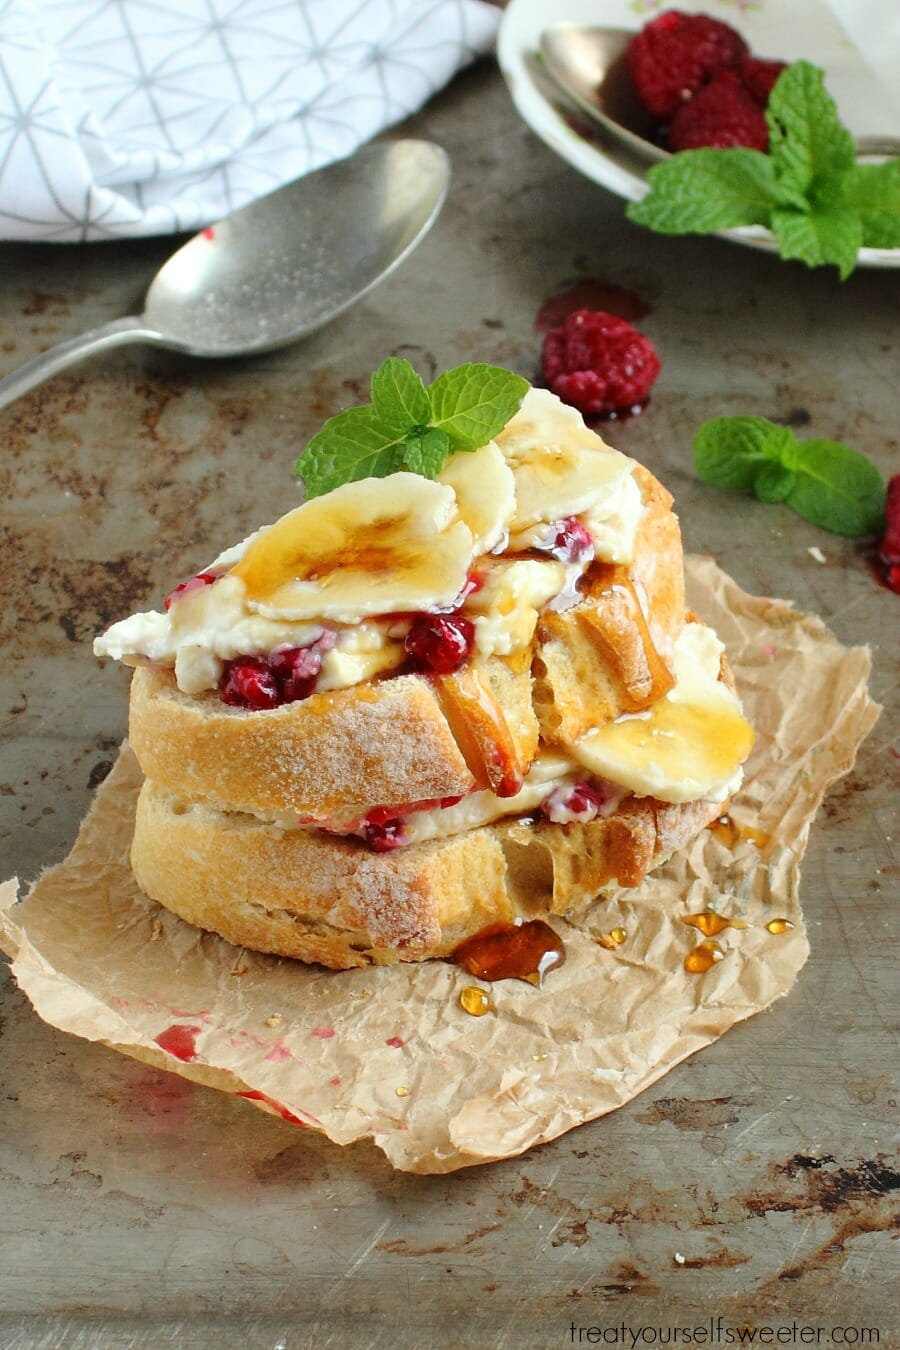 Honey Ricotta Toast with Raspberries and Banana; crunchy toast smothered with creamy, sweet honey ricotta, raspberries and banana. Quick, easy & perfect for brunch!